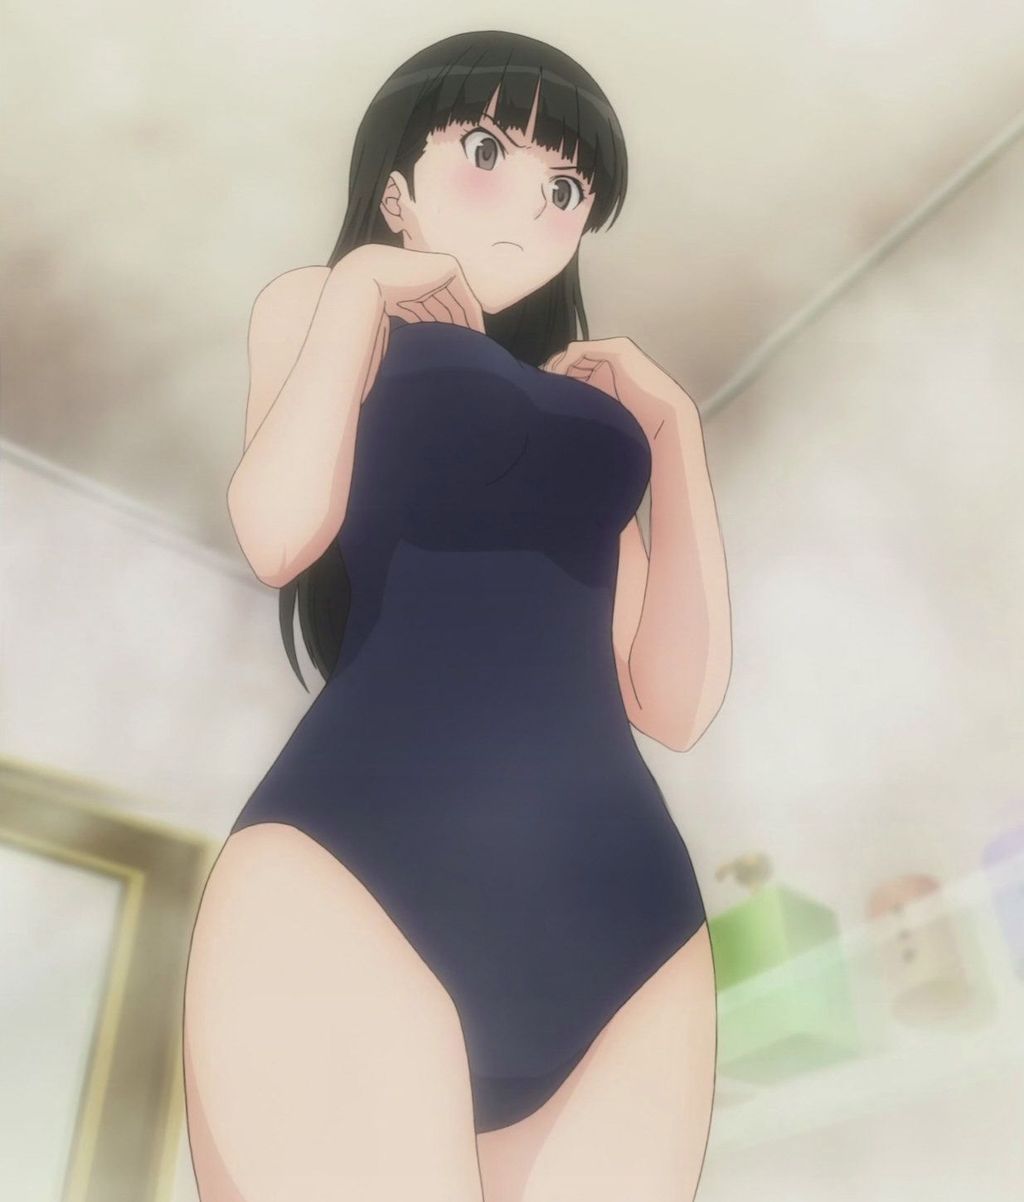 【Sukusui】An image of a suku water girl who looks good on the dazzling sun Part 8 28